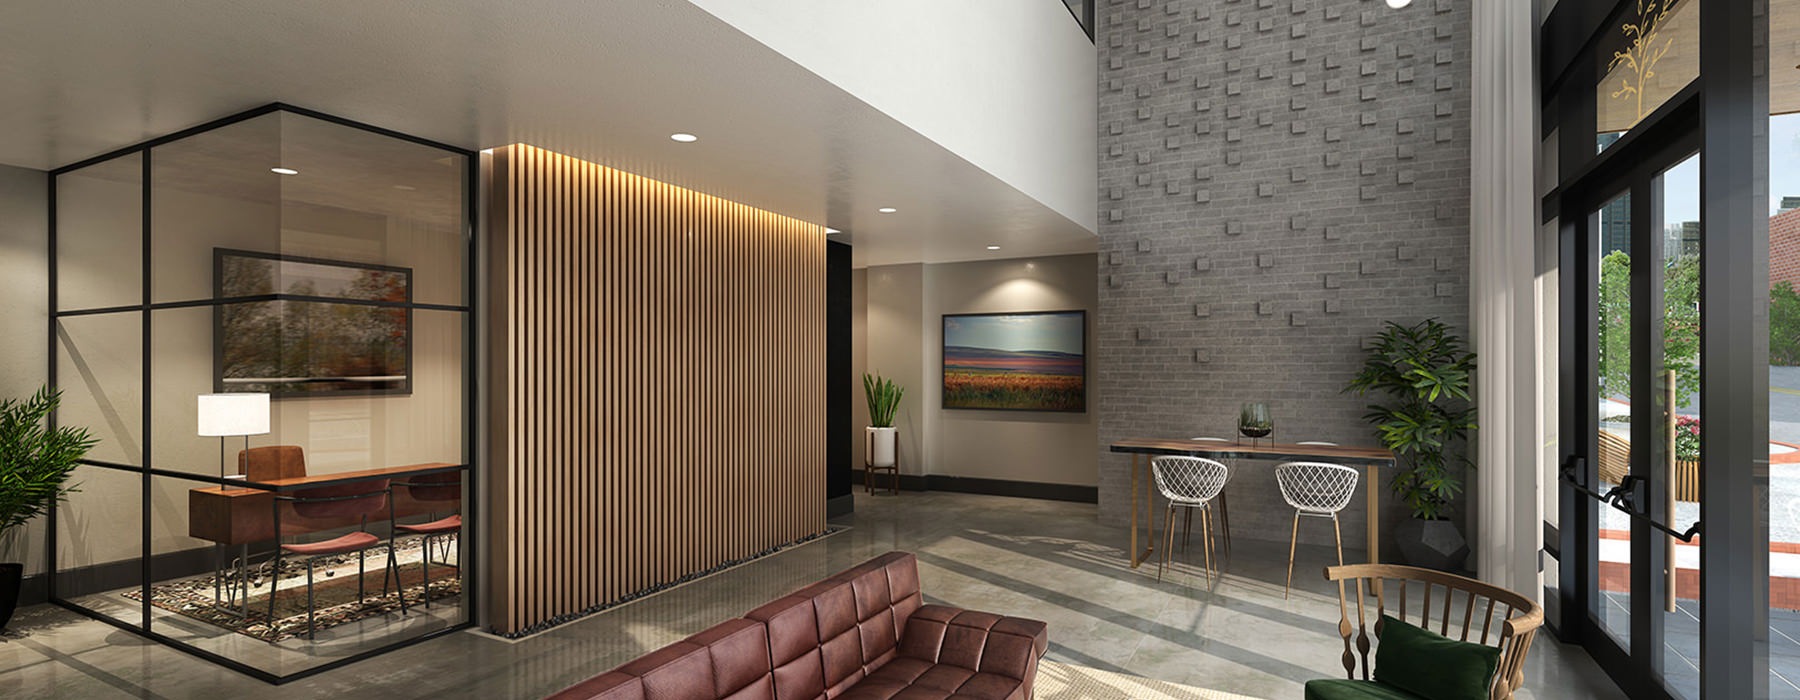 rendering of resident lounge